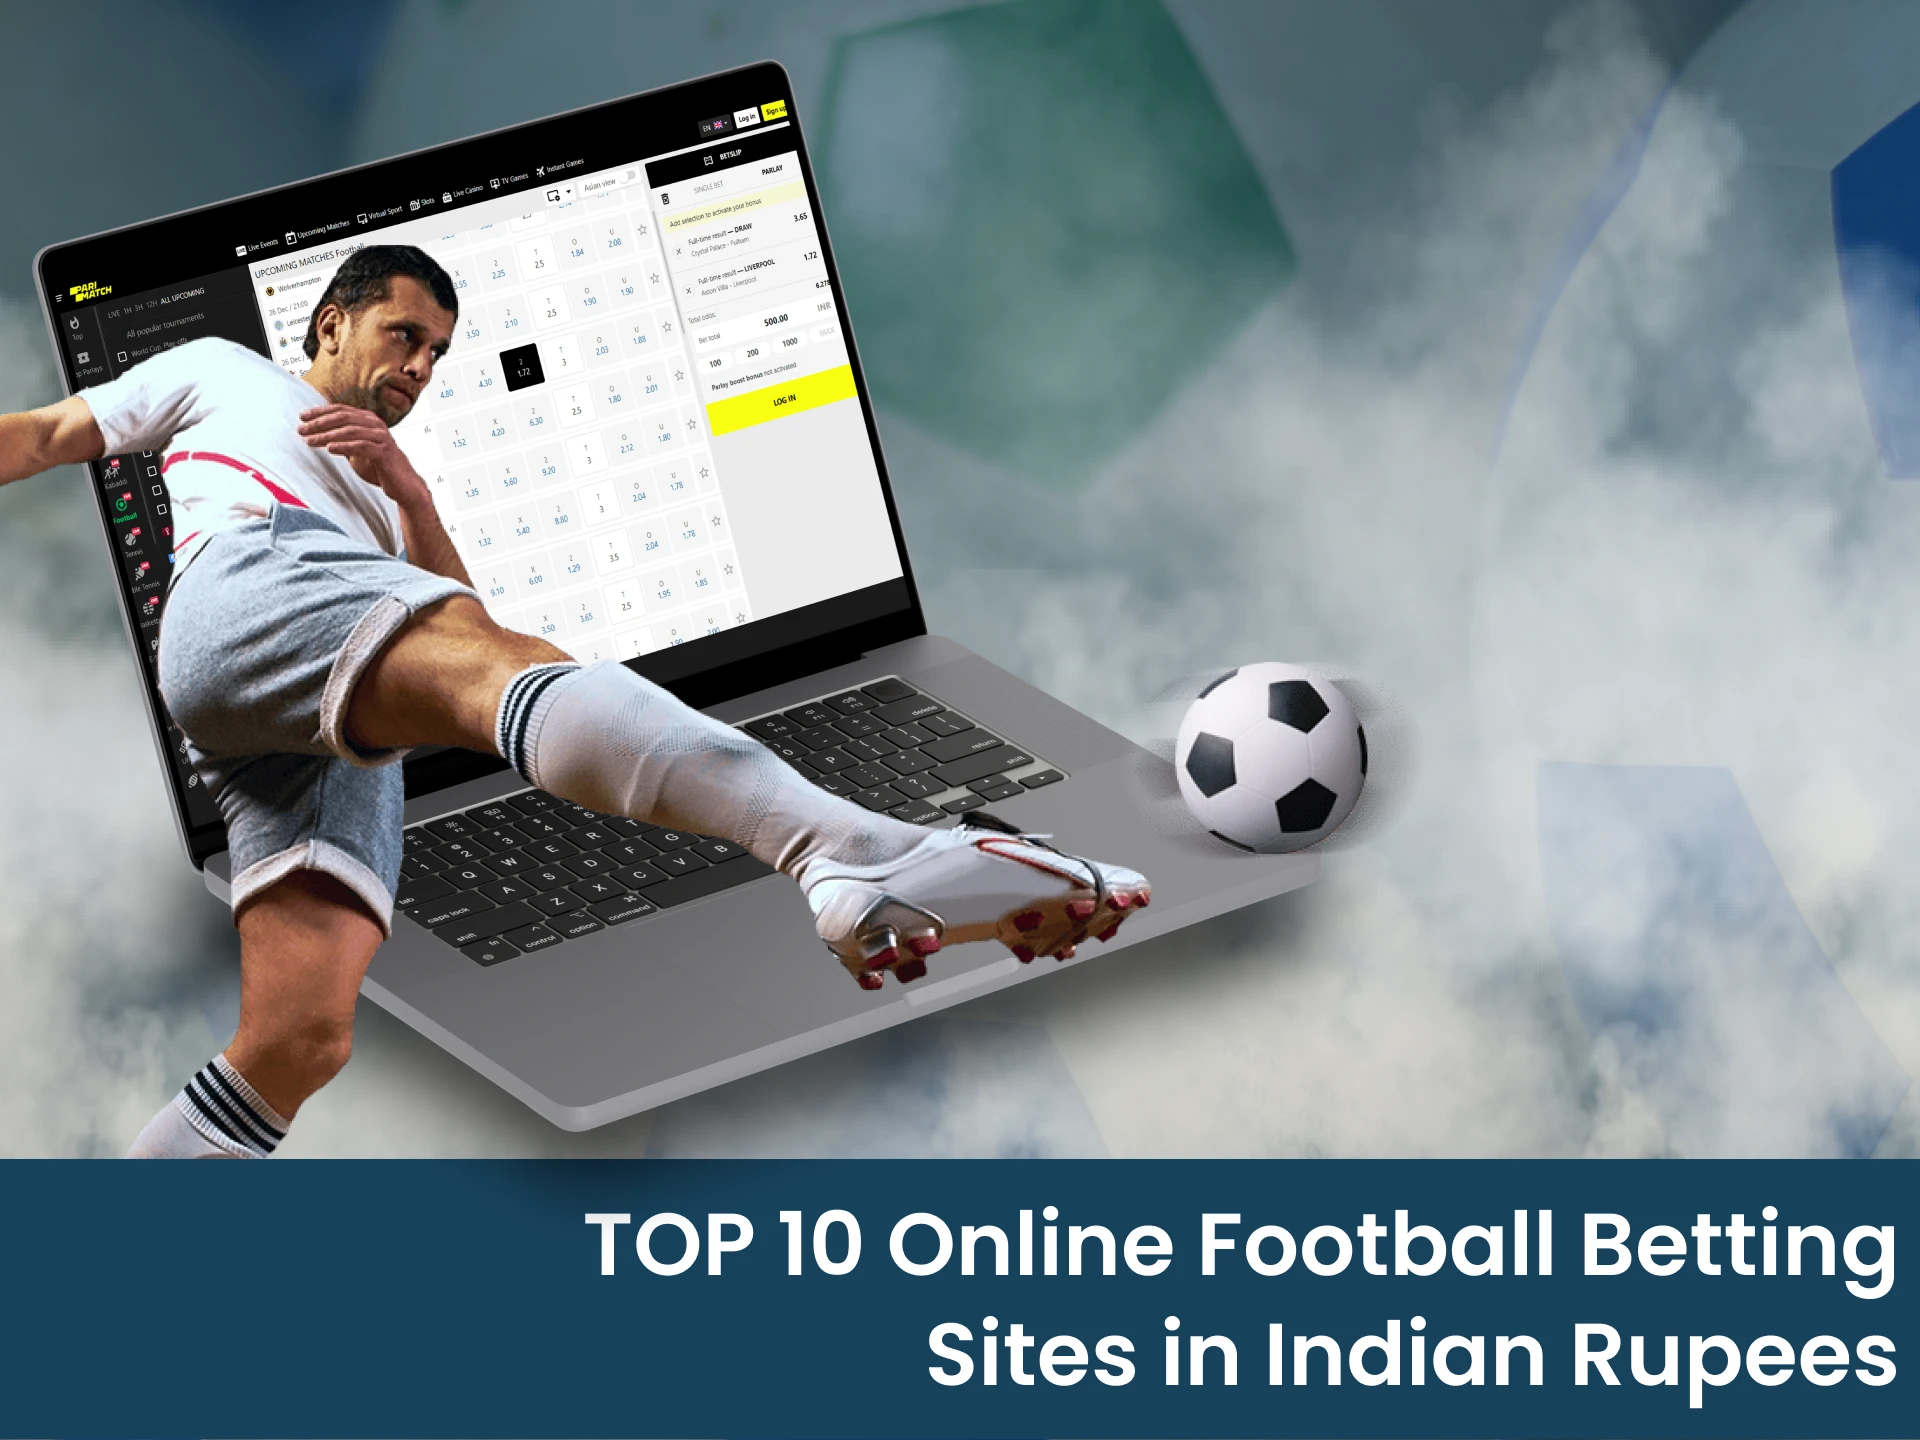 Here you can place bets on football using Indian rupees.